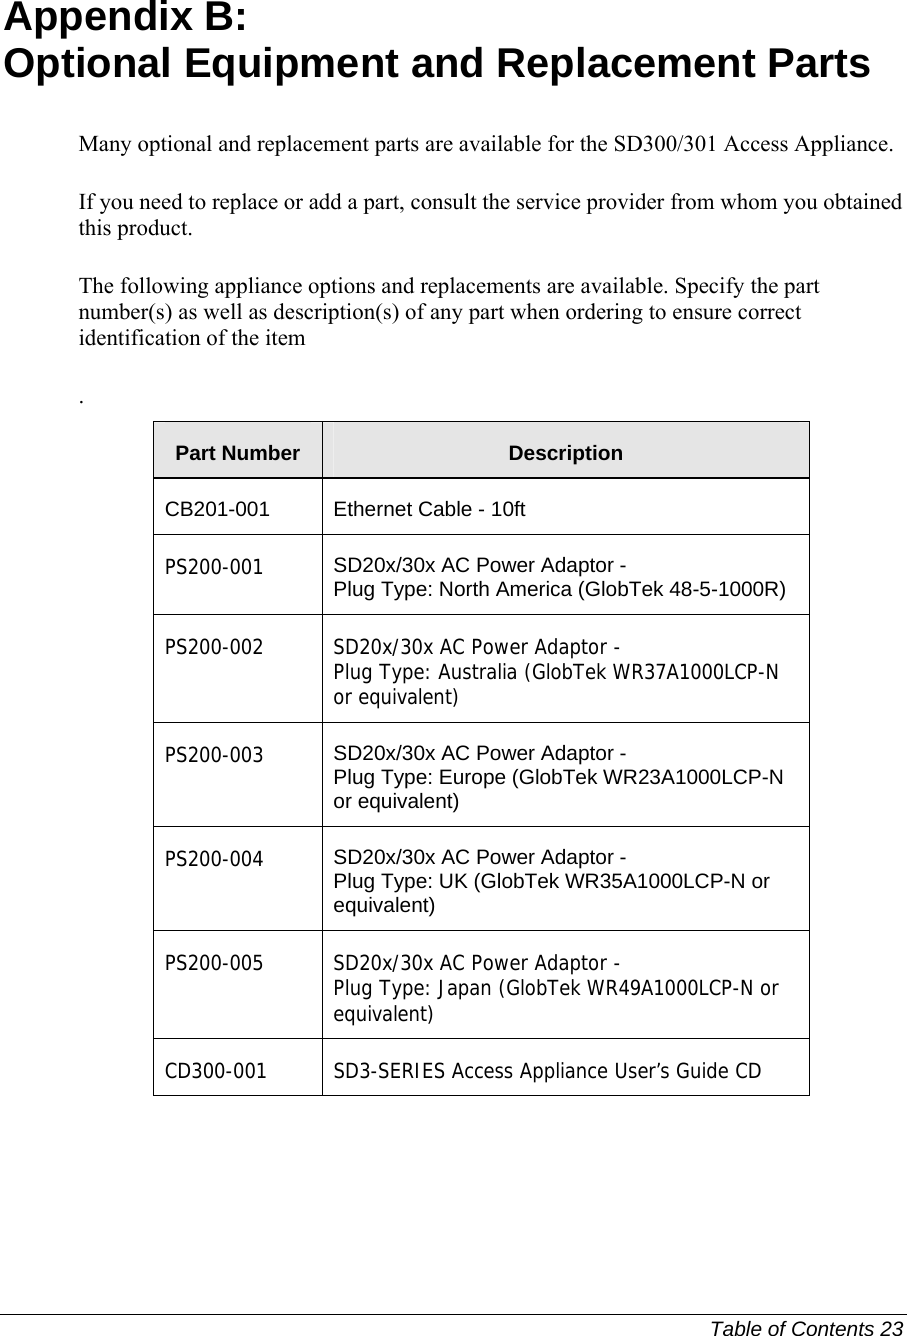   Table of Contents 23  Appendix B: Optional Equipment and Replacement Parts Many optional and replacement parts are available for the SD300/301 Access Appliance.  If you need to replace or add a part, consult the service provider from whom you obtained this product.  The following appliance options and replacements are available. Specify the part number(s) as well as description(s) of any part when ordering to ensure correct identification of the item . Part Number  Description CB201-001  Ethernet Cable - 10ft PS200-001 SD20x/30x AC Power Adaptor -  Plug Type: North America (GlobTek 48-5-1000R) PS200-002 SD20x/30x AC Power Adaptor -  Plug Type: Australia (GlobTek WR37A1000LCP-N or equivalent) PS200-003 SD20x/30x AC Power Adaptor -  Plug Type: Europe (GlobTek WR23A1000LCP-N or equivalent) PS200-004 SD20x/30x AC Power Adaptor -  Plug Type: UK (GlobTek WR35A1000LCP-N or equivalent) PS200-005 SD20x/30x AC Power Adaptor -  Plug Type: Japan (GlobTek WR49A1000LCP-N or equivalent) CD300-001 SD3-SERIES Access Appliance User’s Guide CD  